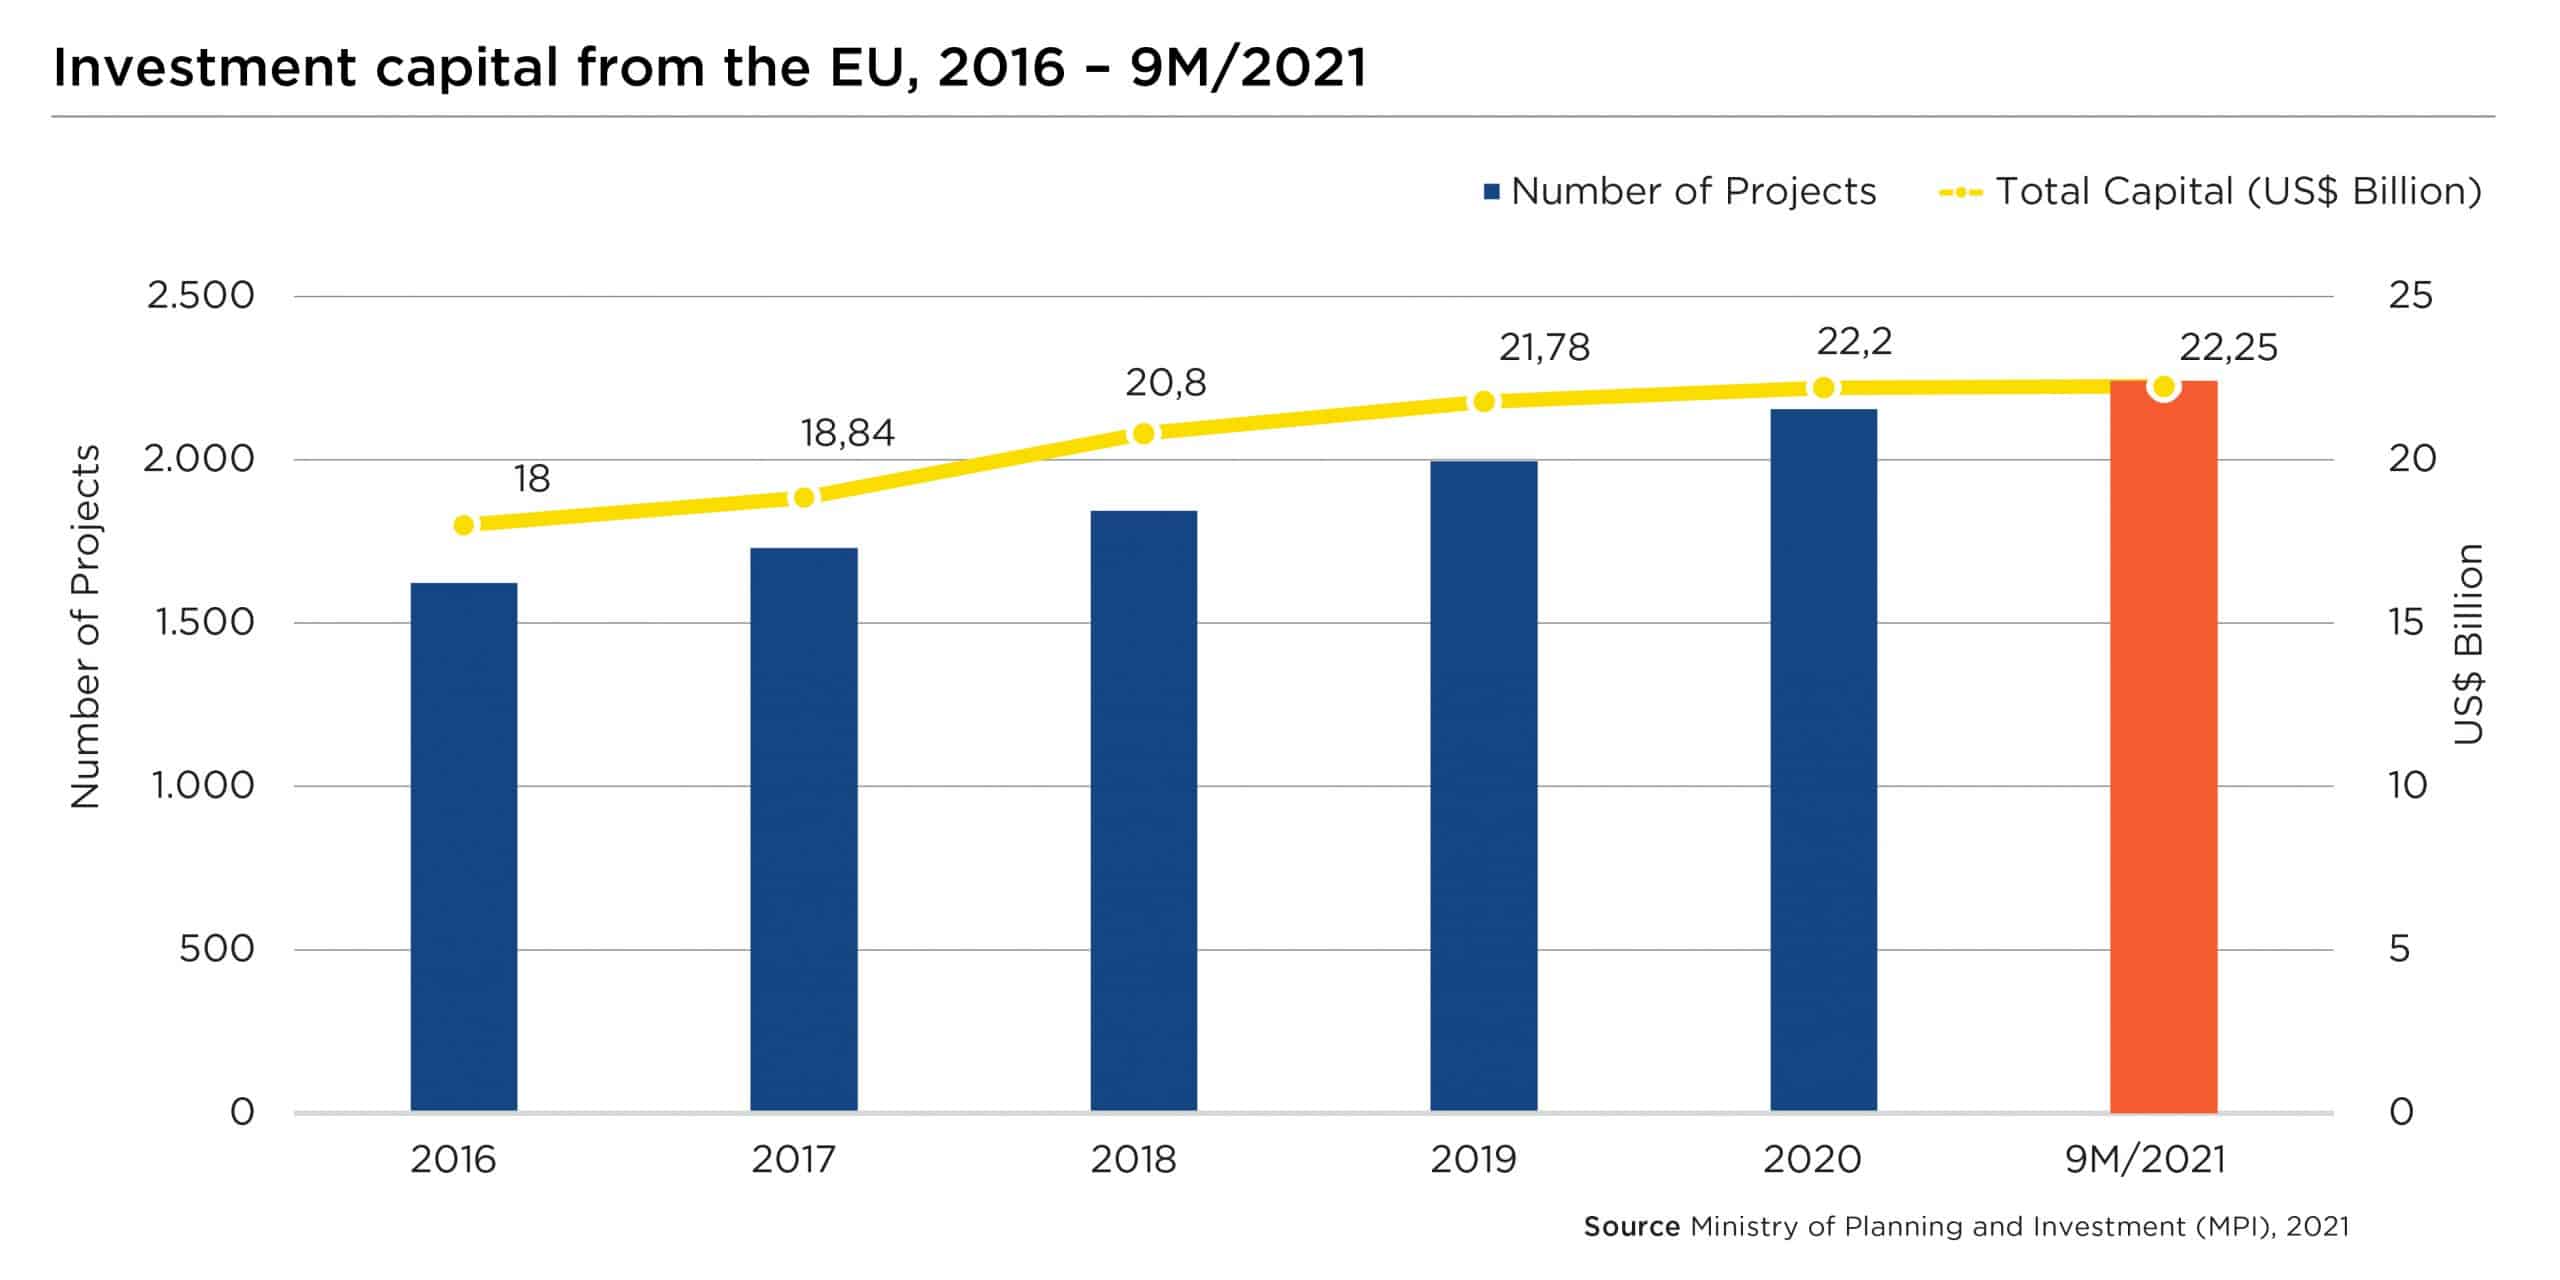 Investment capital from the EU, 2016 – 9M/2021